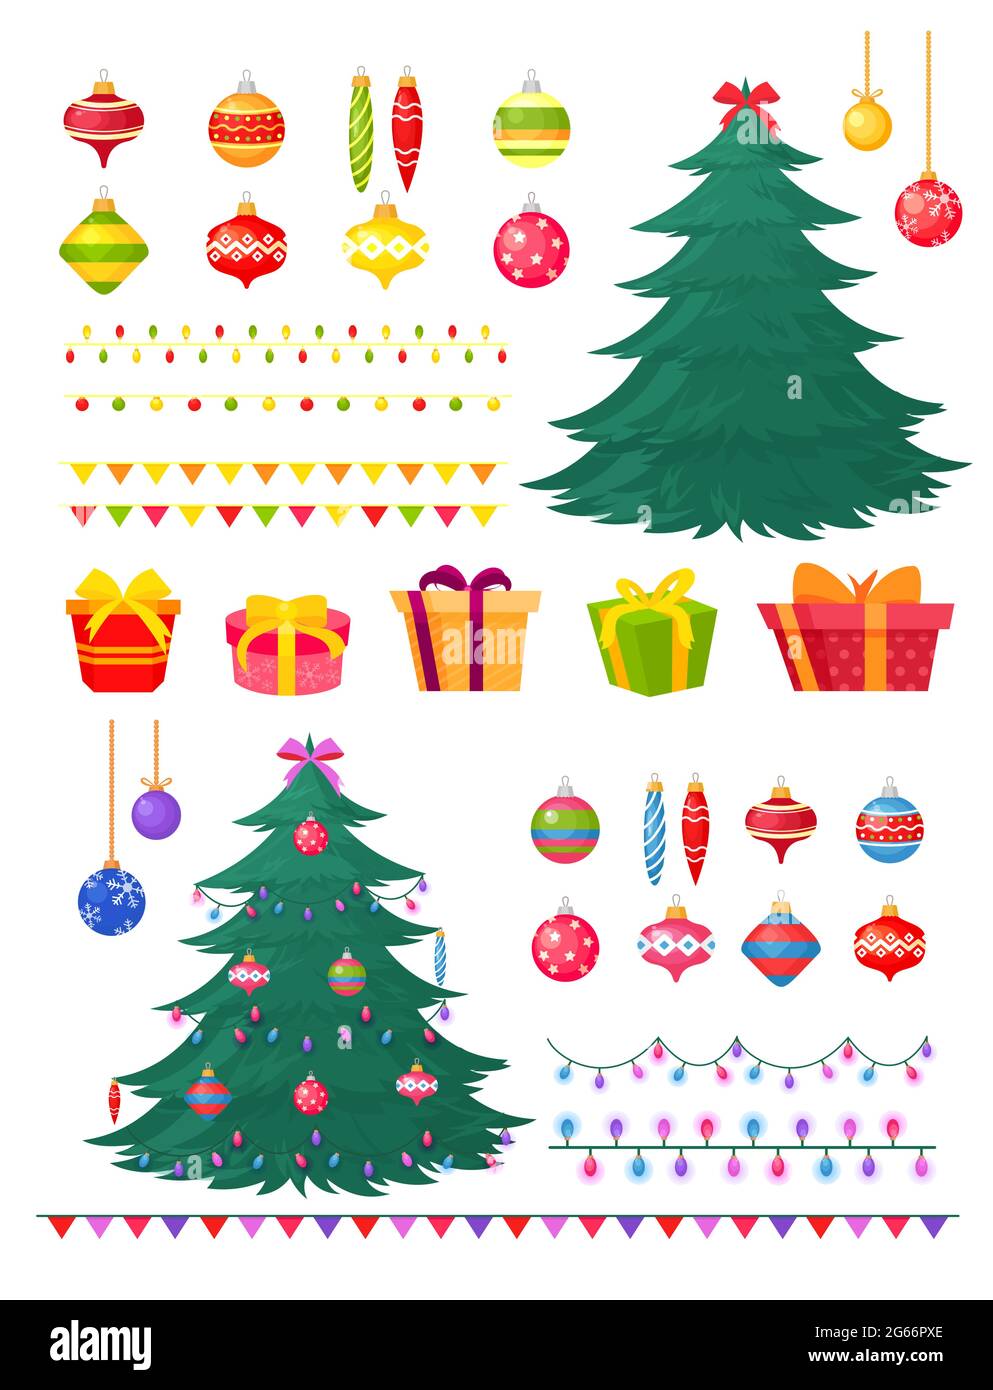 Vector illustration set of Christmas tree with decorations and gift boxes. Winter decore - toys, garlands, balls, xmas trees isolated on white Stock Vector